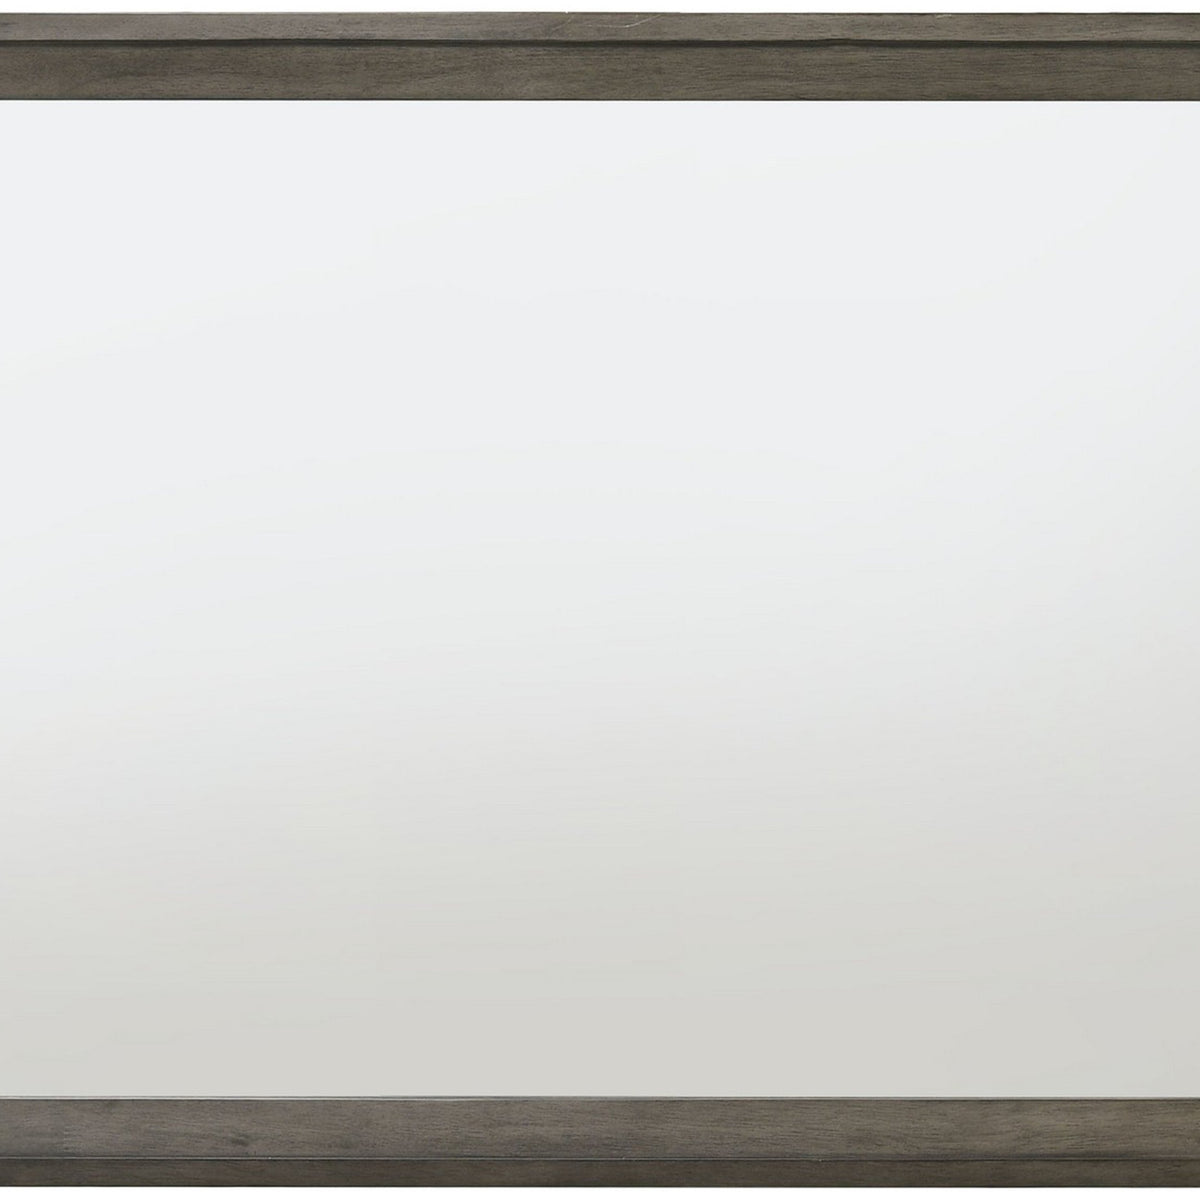 Rectangular Wooden Frame Mirror with Mounting Hardware, Gray and Silver - BM225884